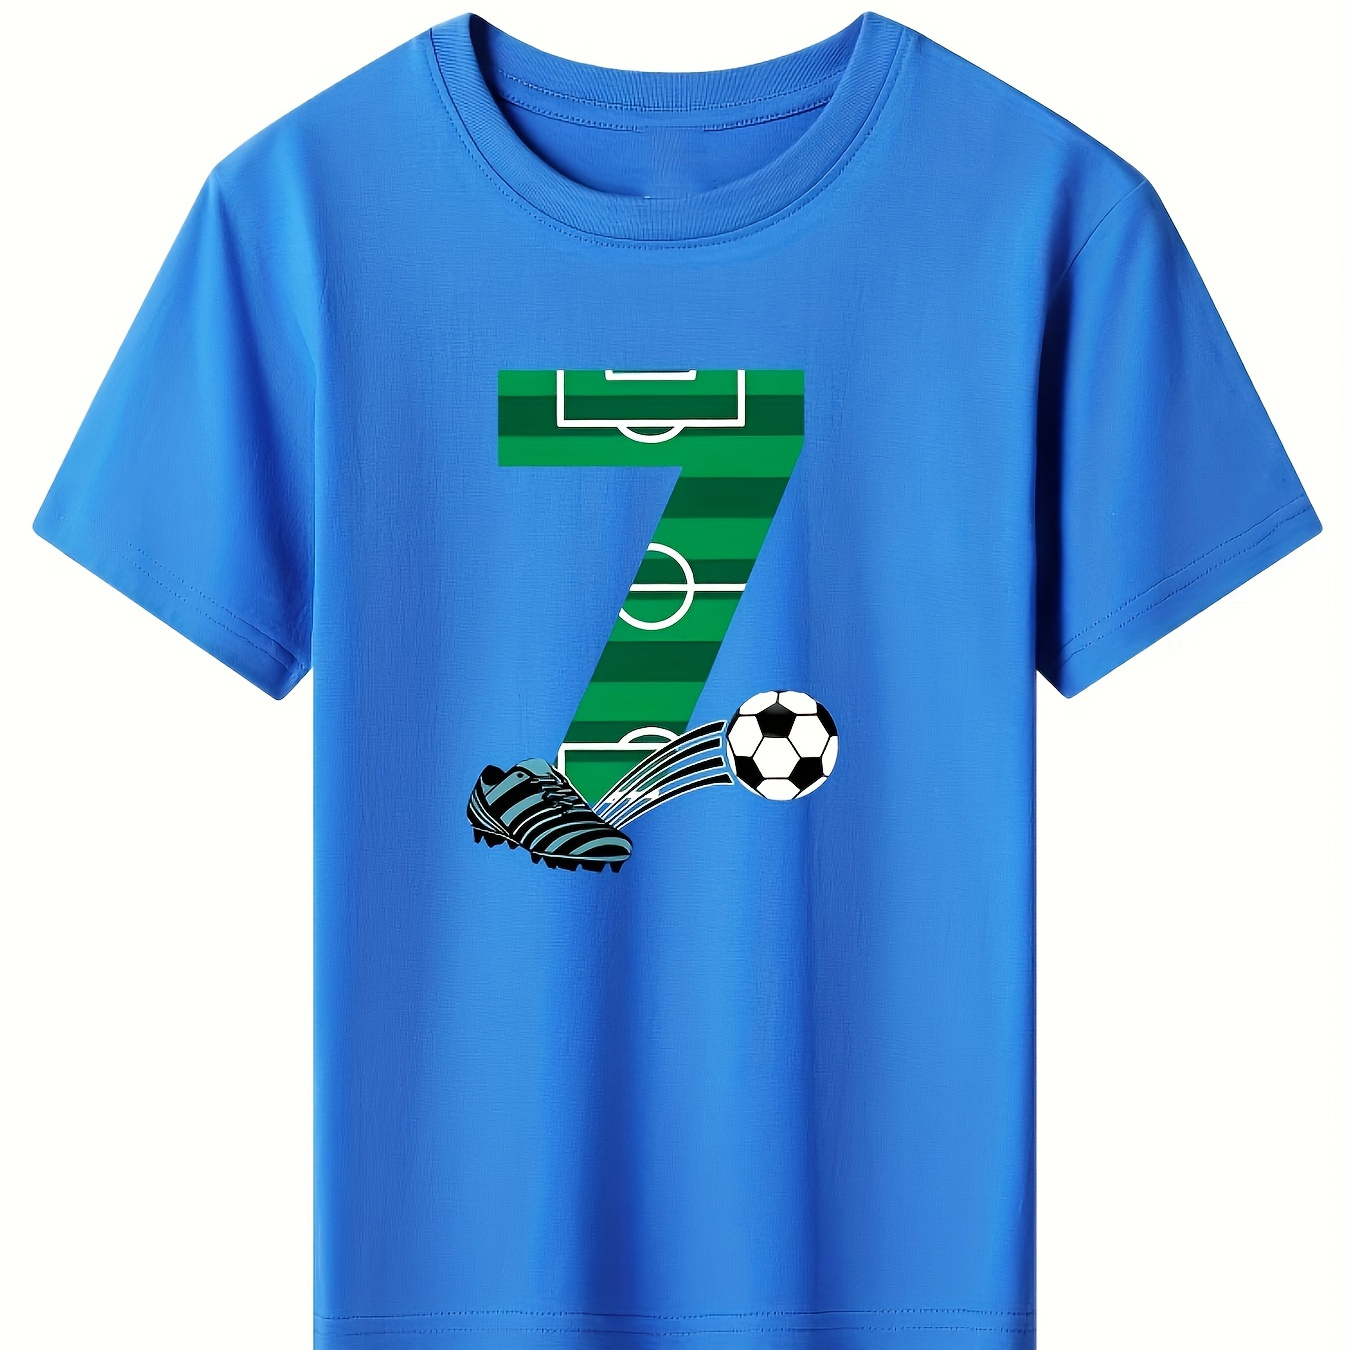 

Boys' Fashion Soccer-themed T-shirt, Casual Style, Vibrant Blue, Soft Cotton Material, Short Sleeves, Crew Neck - Sizes Available